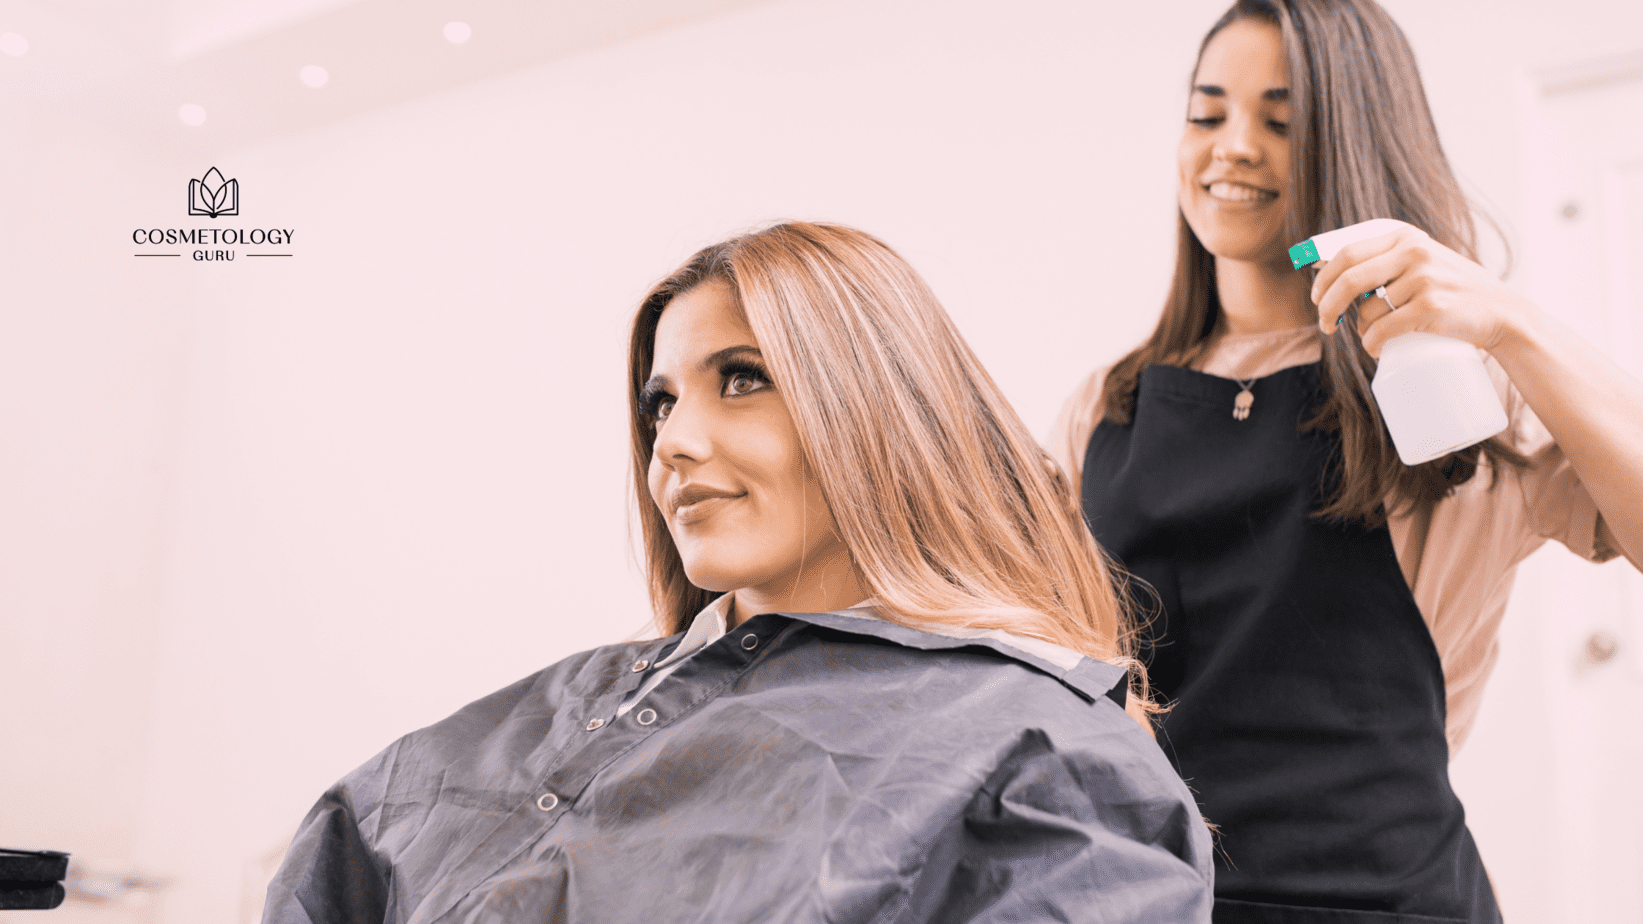 Licensed cosmetologist- Landing your first job